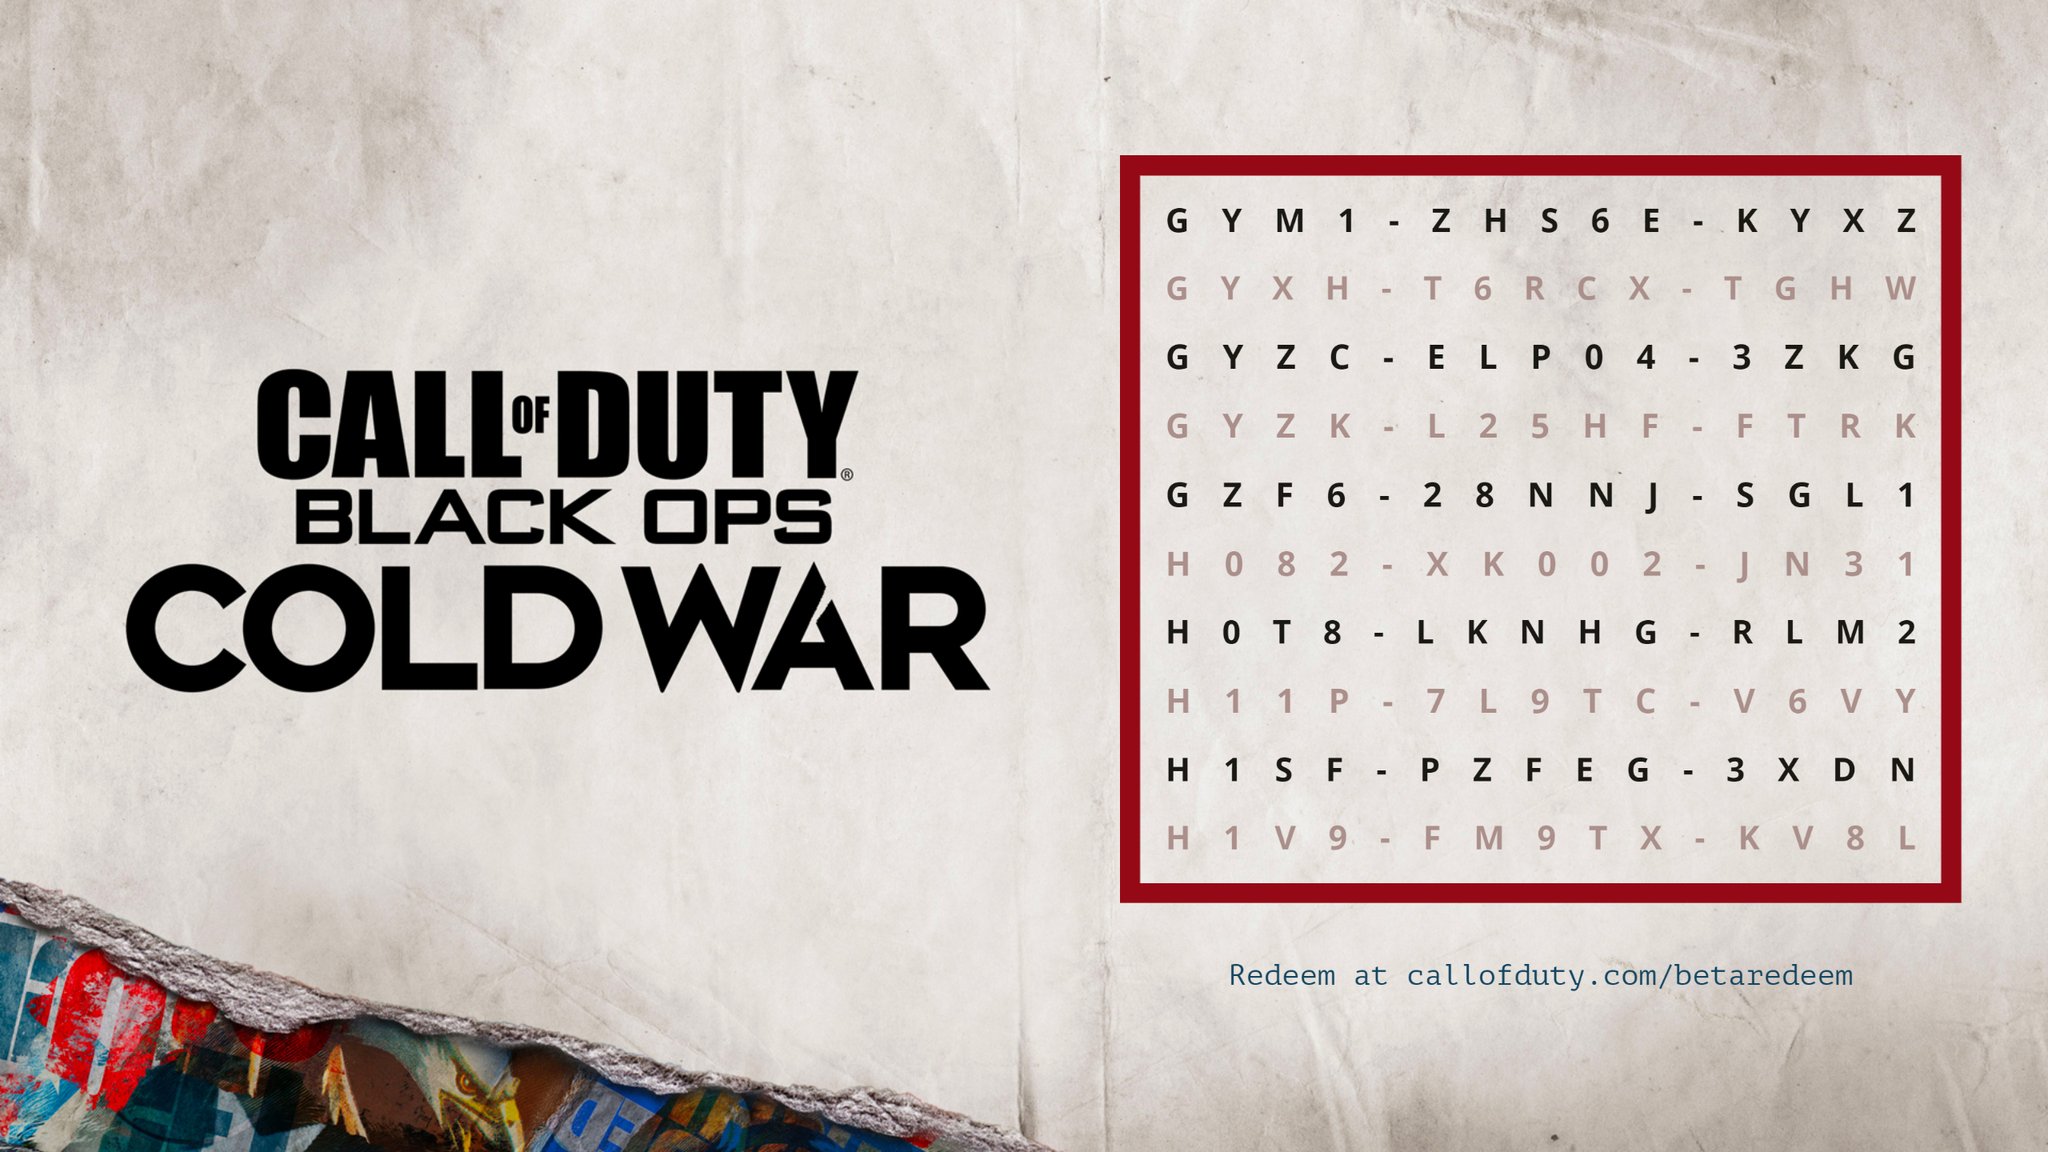 Treyarch Studios Still Need A Blackopscoldwar Beta Code For Early Access Grab Yours Now